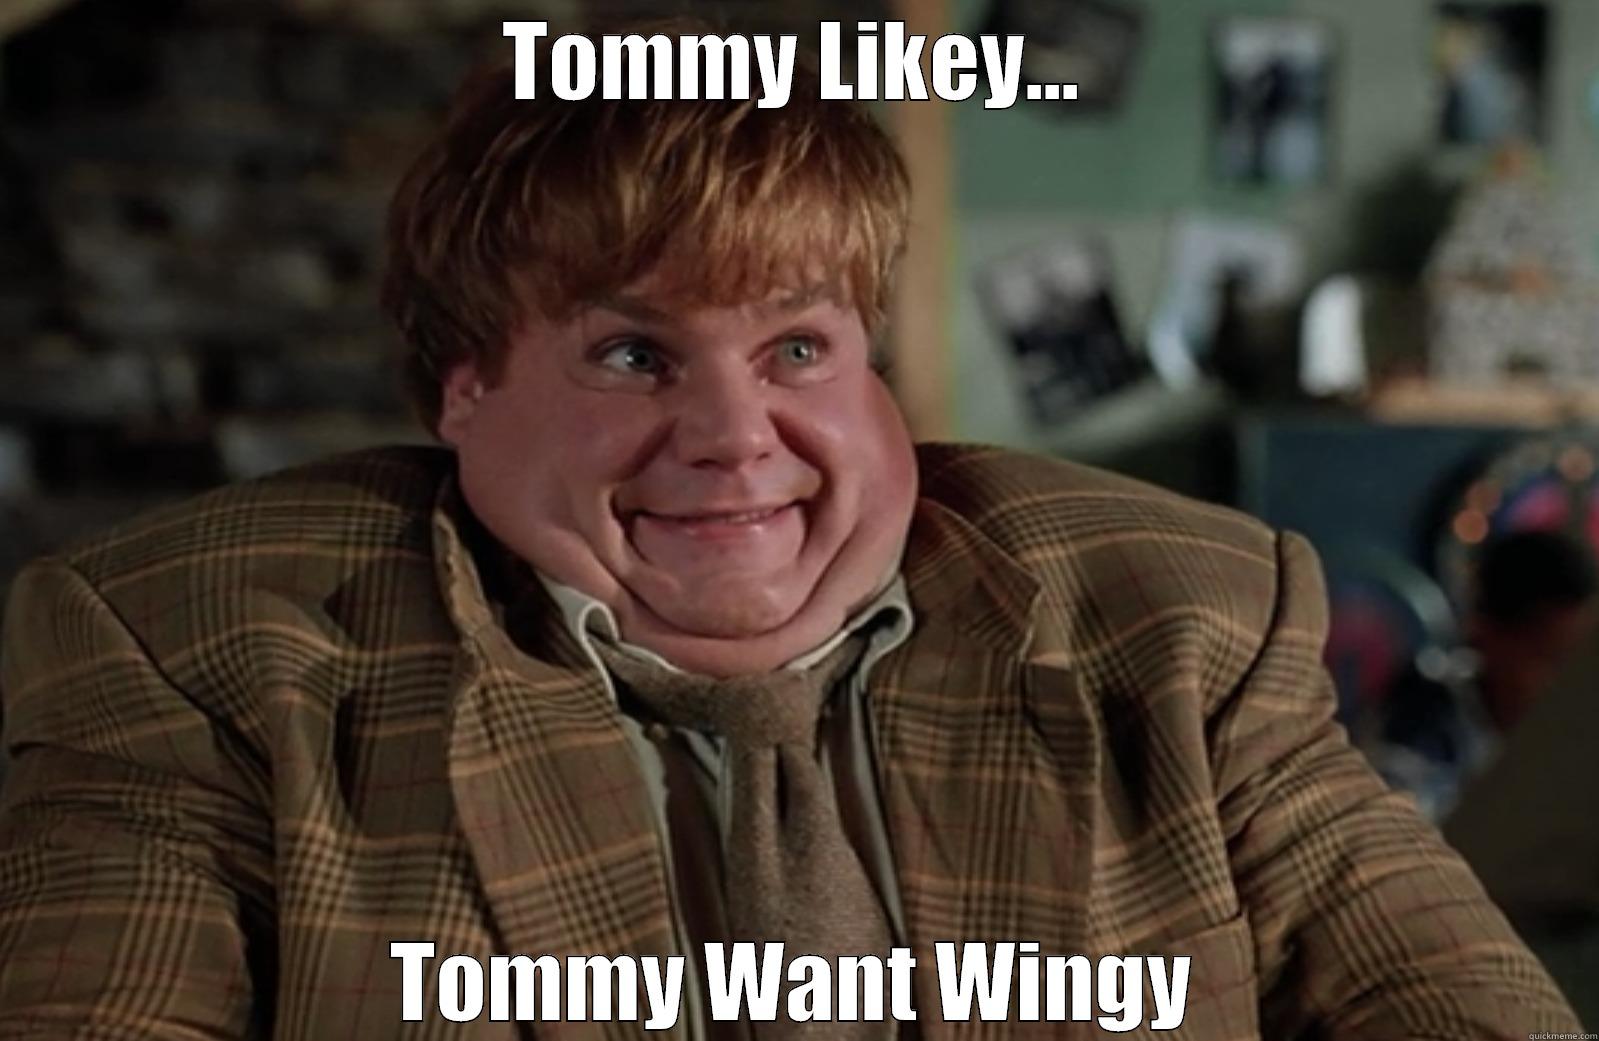 TOMMY LIKEY... TOMMY WANT WINGY Misc